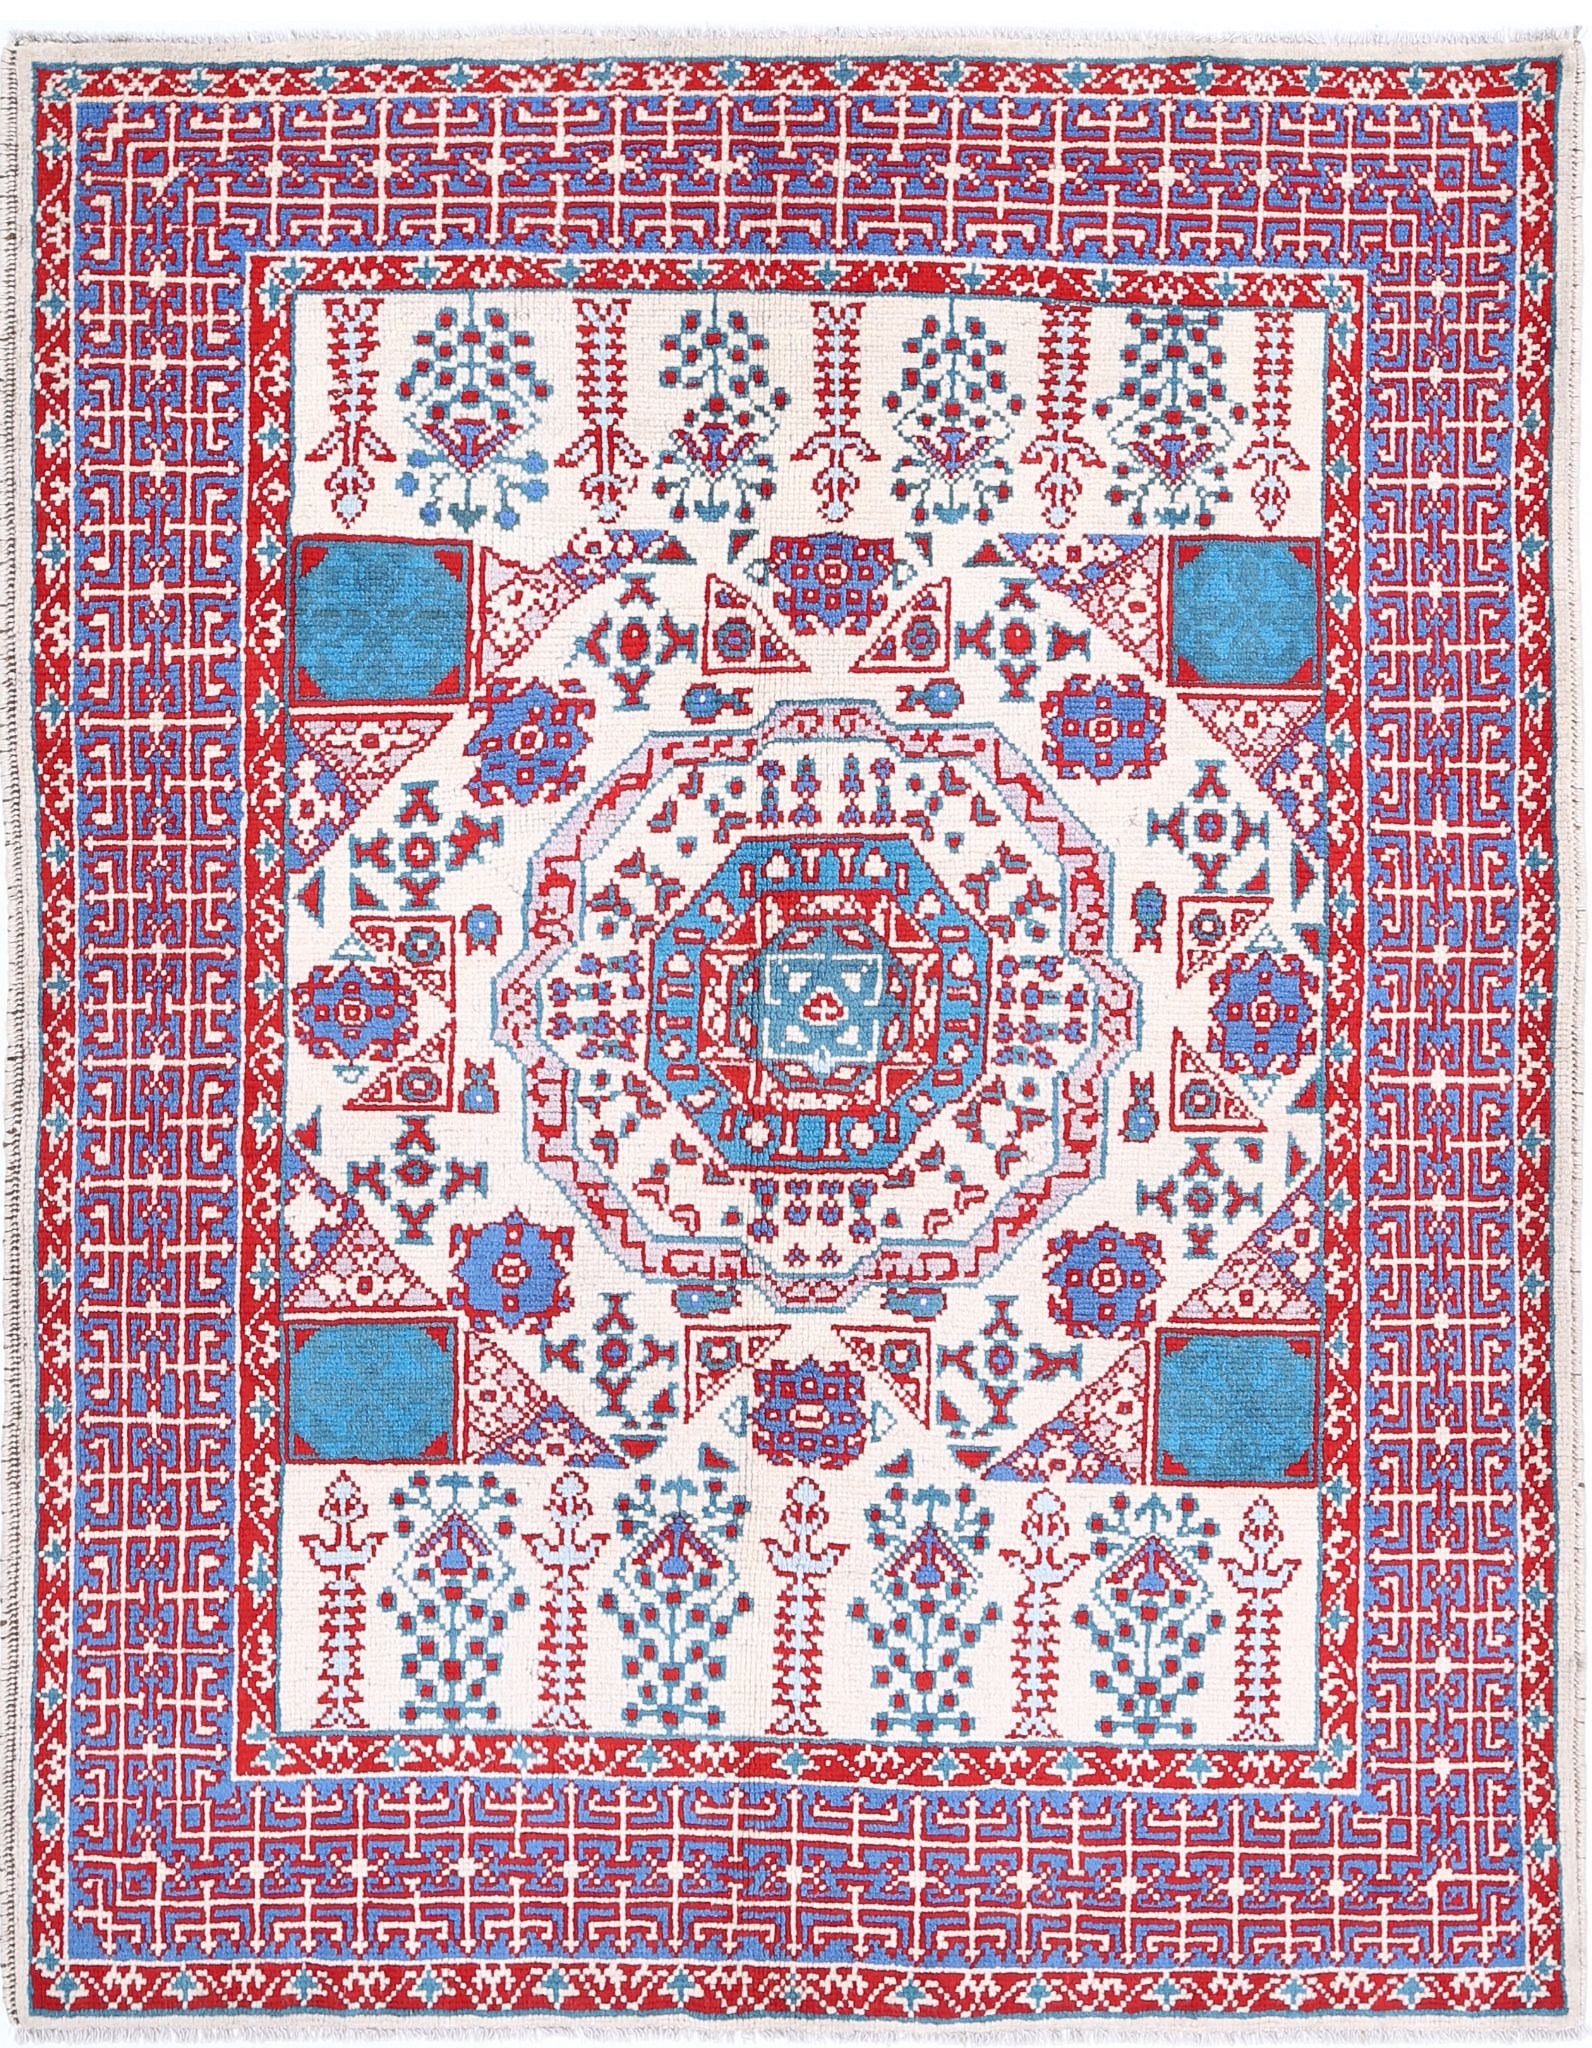 Revival-hand-knotted-qarghani-wool-rug-5014095.jpg